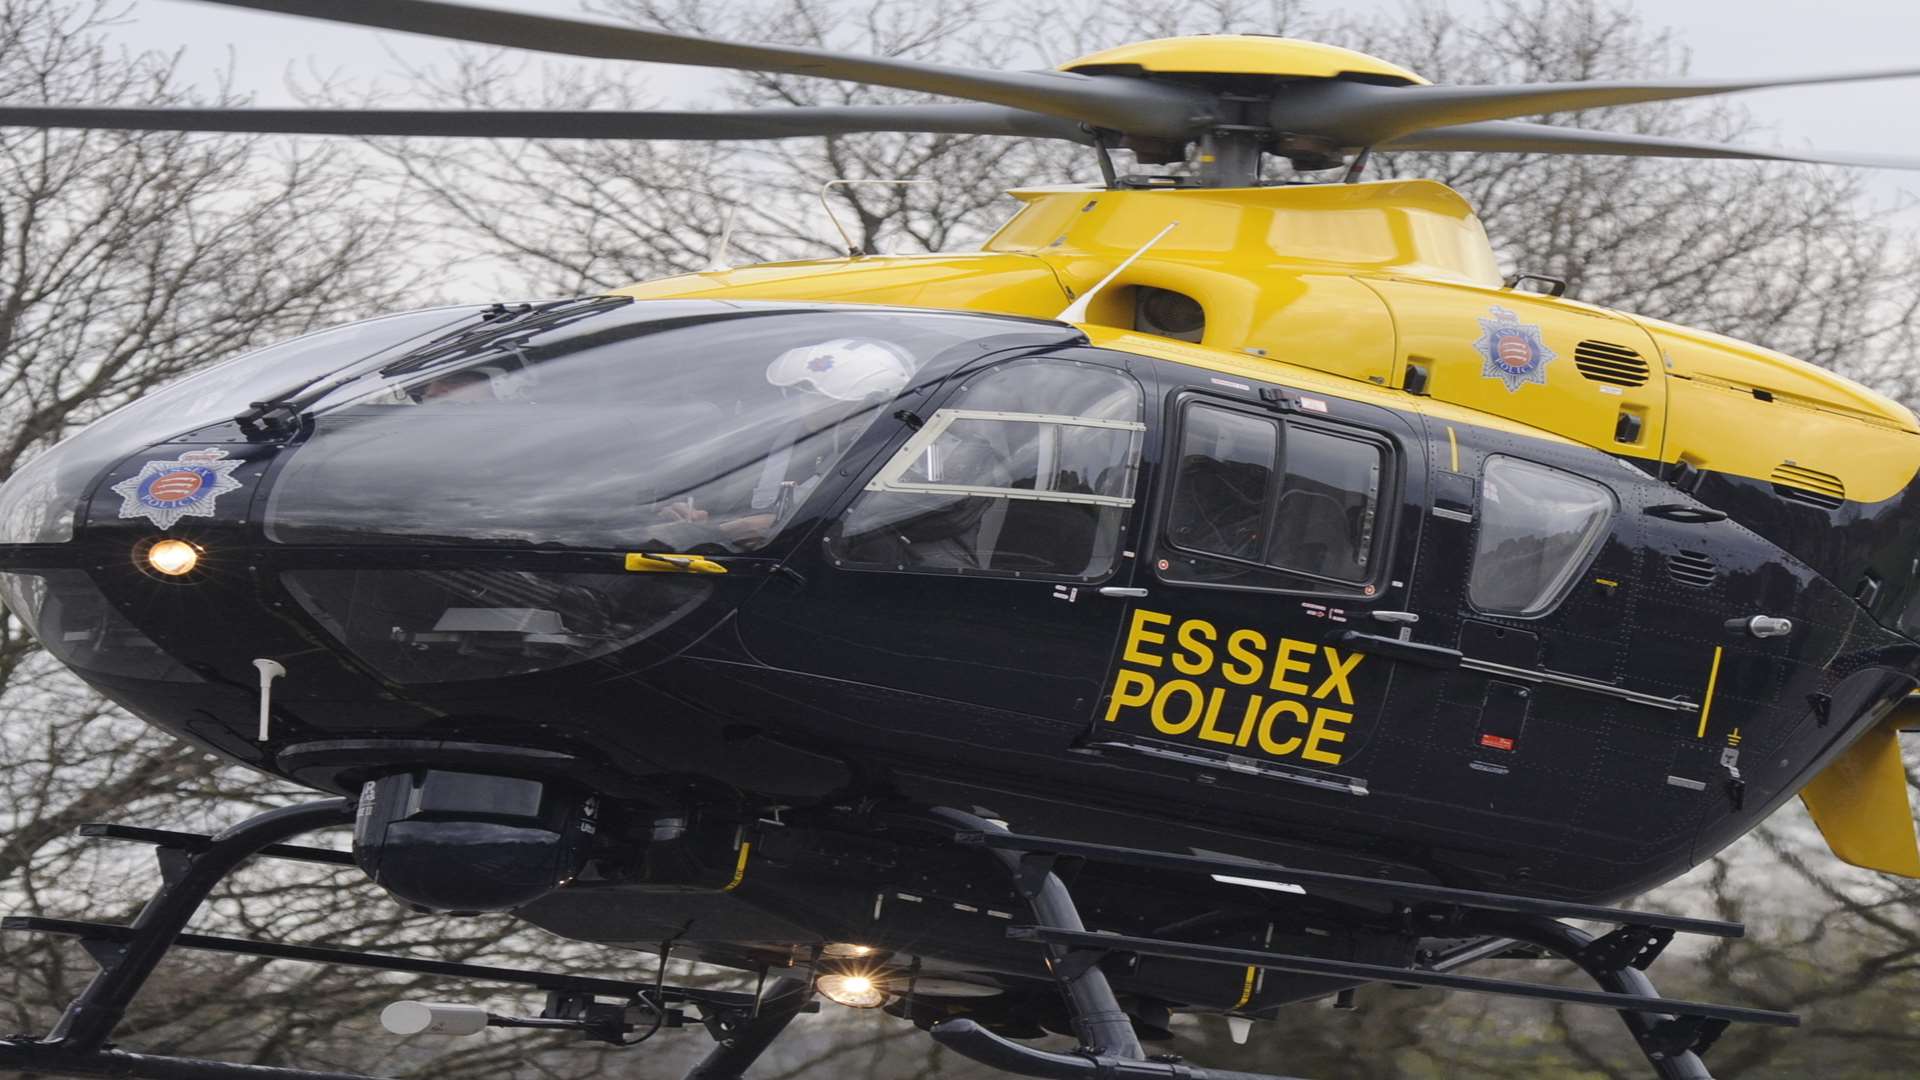 The police helicopter was used in the search. Stock picture by Matthew Walker